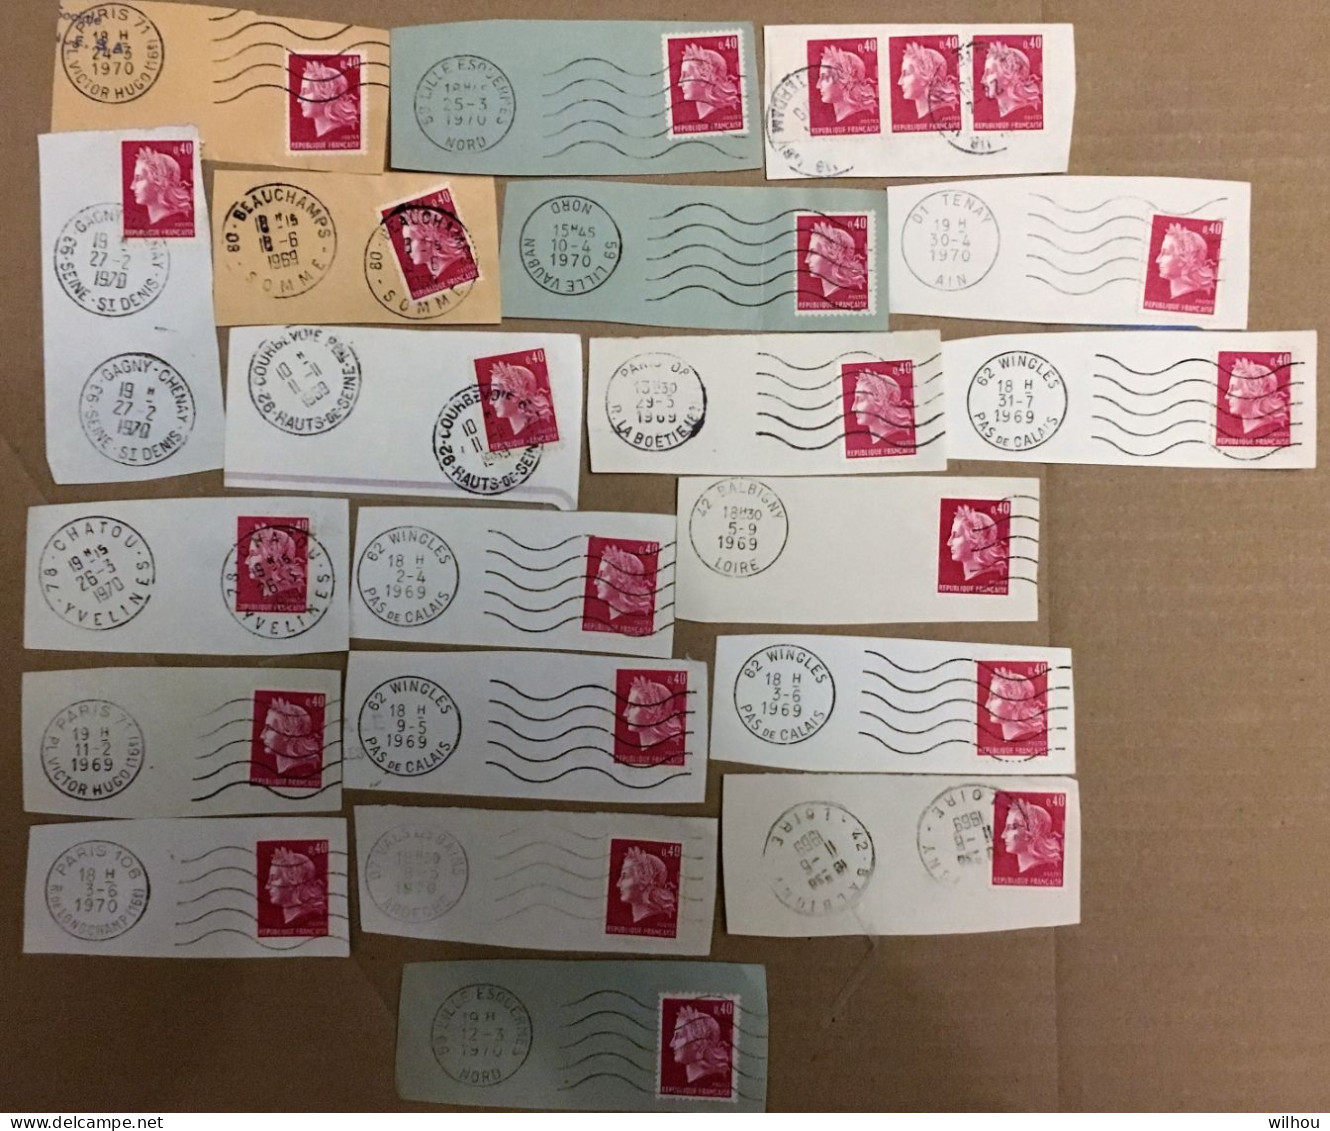 LOT DE 22 TIMBRES MARIANNE CHEFFER OBLITERATIONS PUBLICITAIRES A 0.40 ROUGES N° 1536 B - 1967-1970 Marianna Di Cheffer